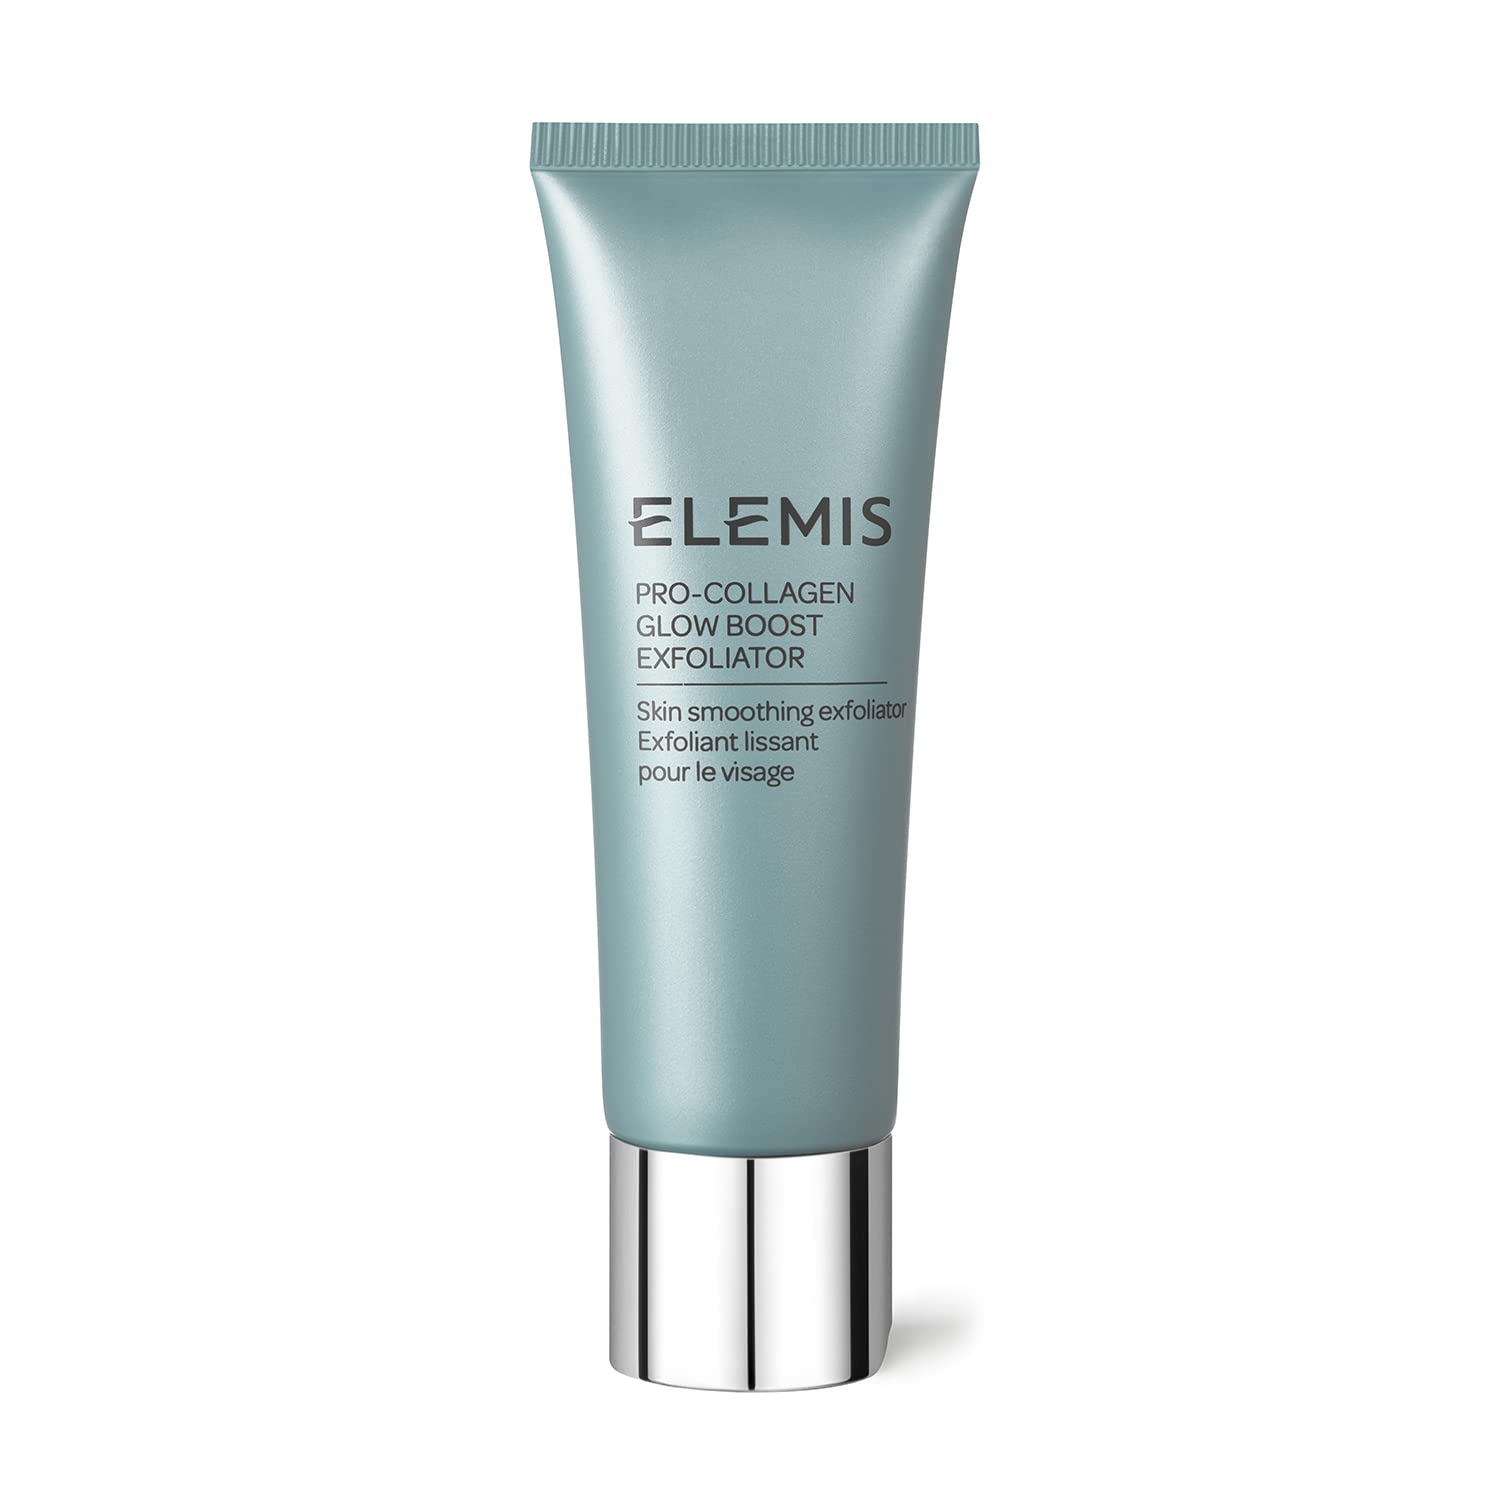 ELEMIS Pro-Collagen Glow Boost Exfoliator, Gentle Physical Facial Exfoliant Softens, and Polishes for Smooth, Glowing, Hydrated Skin, 100mL